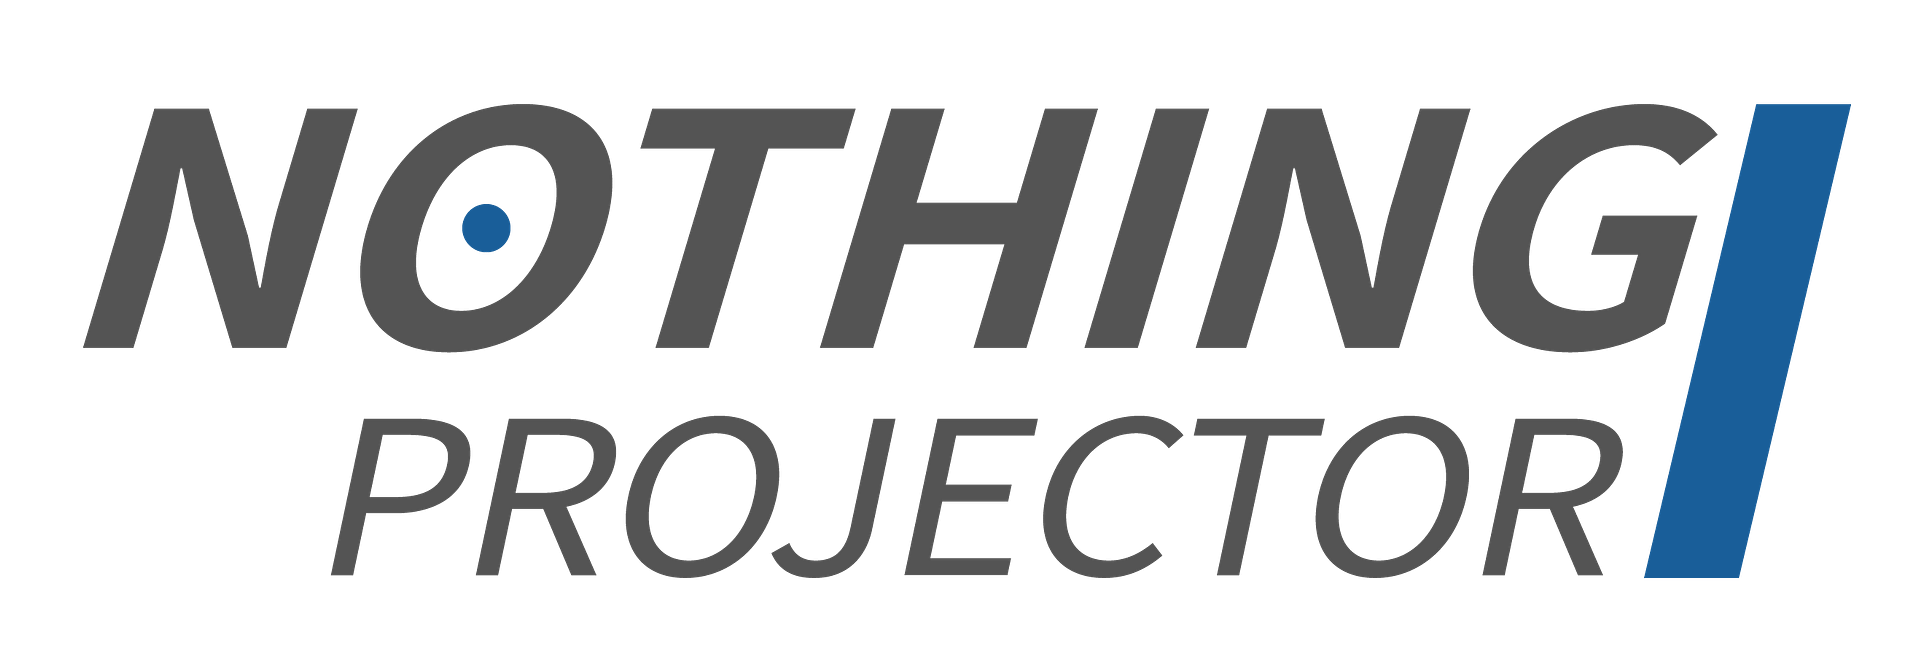 NothingProjector Logo Transparante Achtergrond